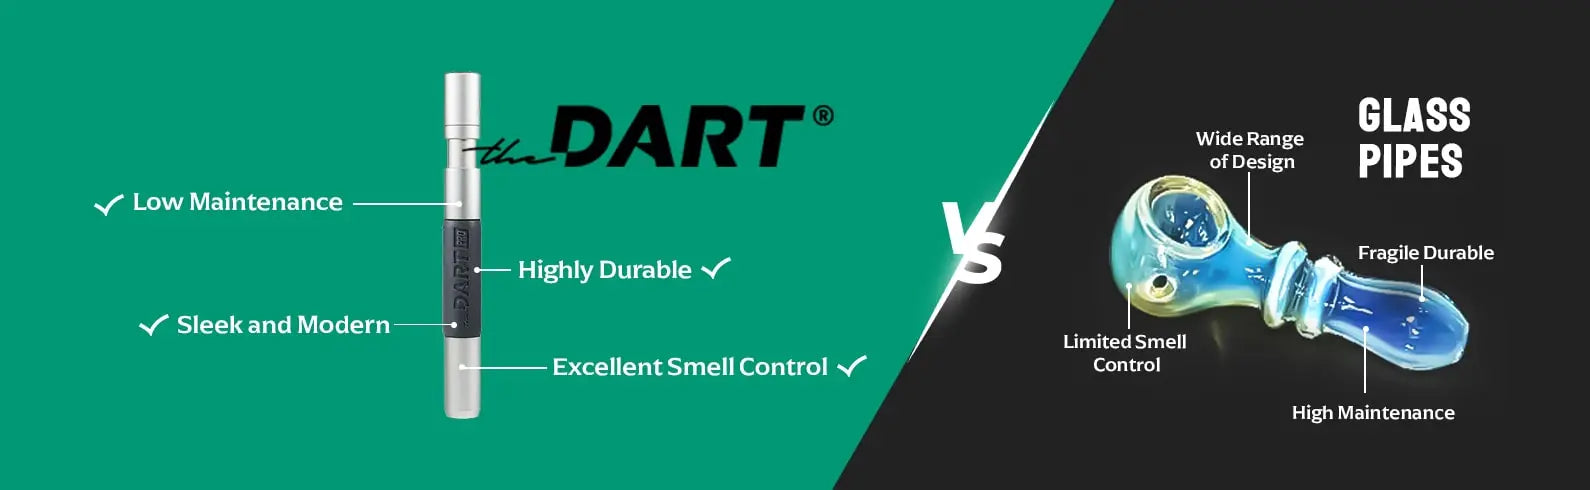 glass pipes vs the dart for smoking experience